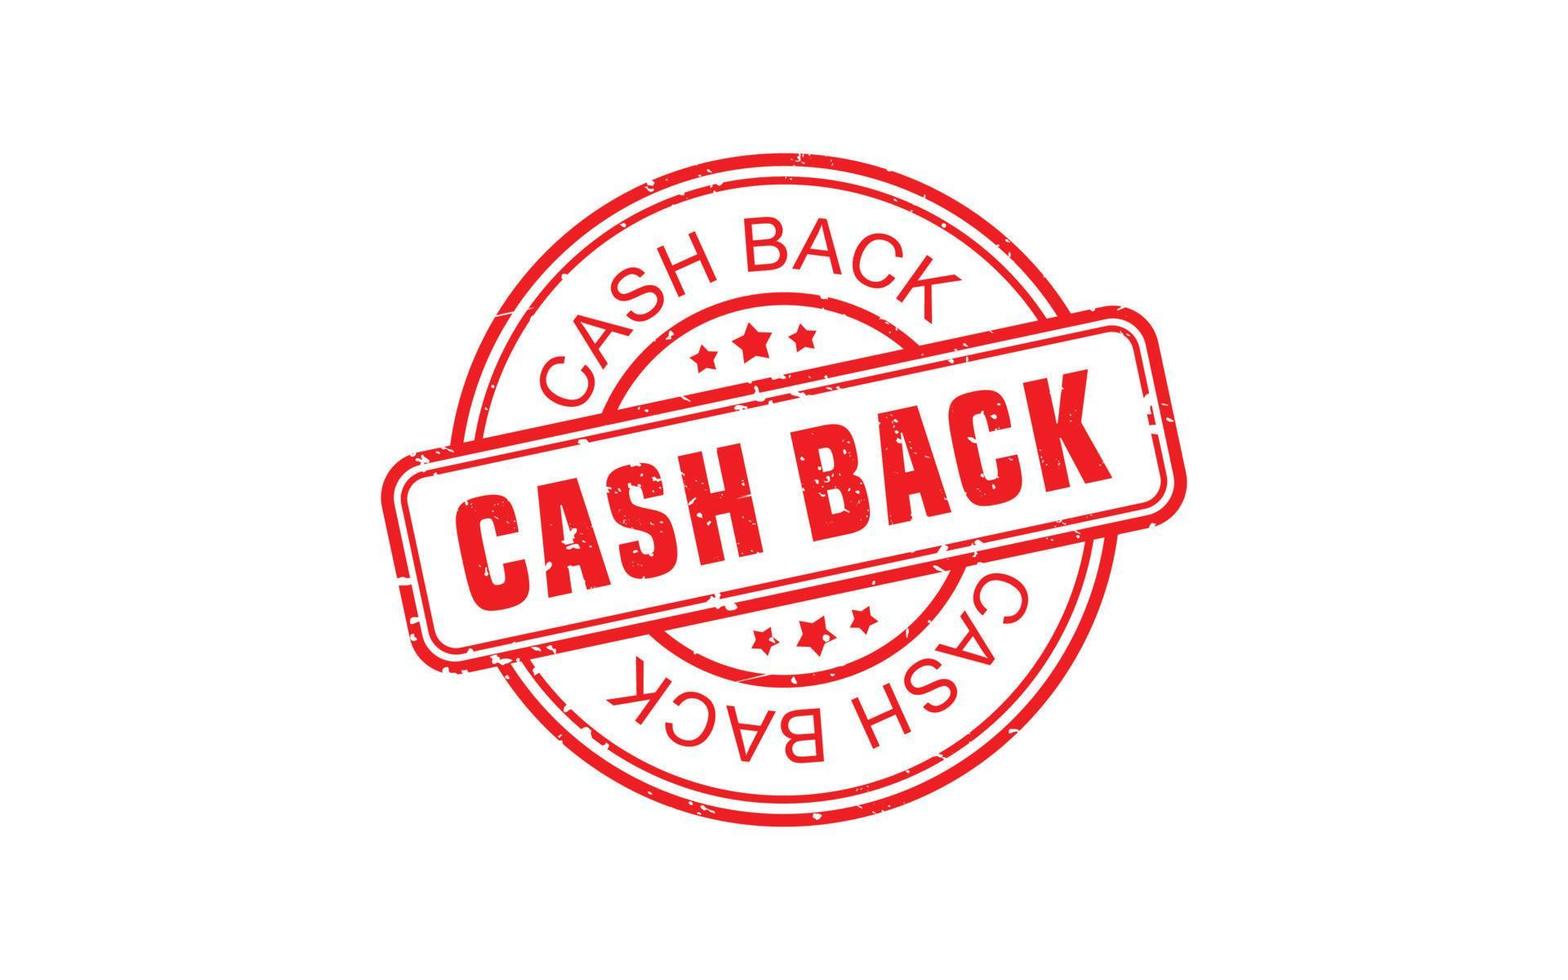 CASH BACK rubber stamp with grunge style on white background vector